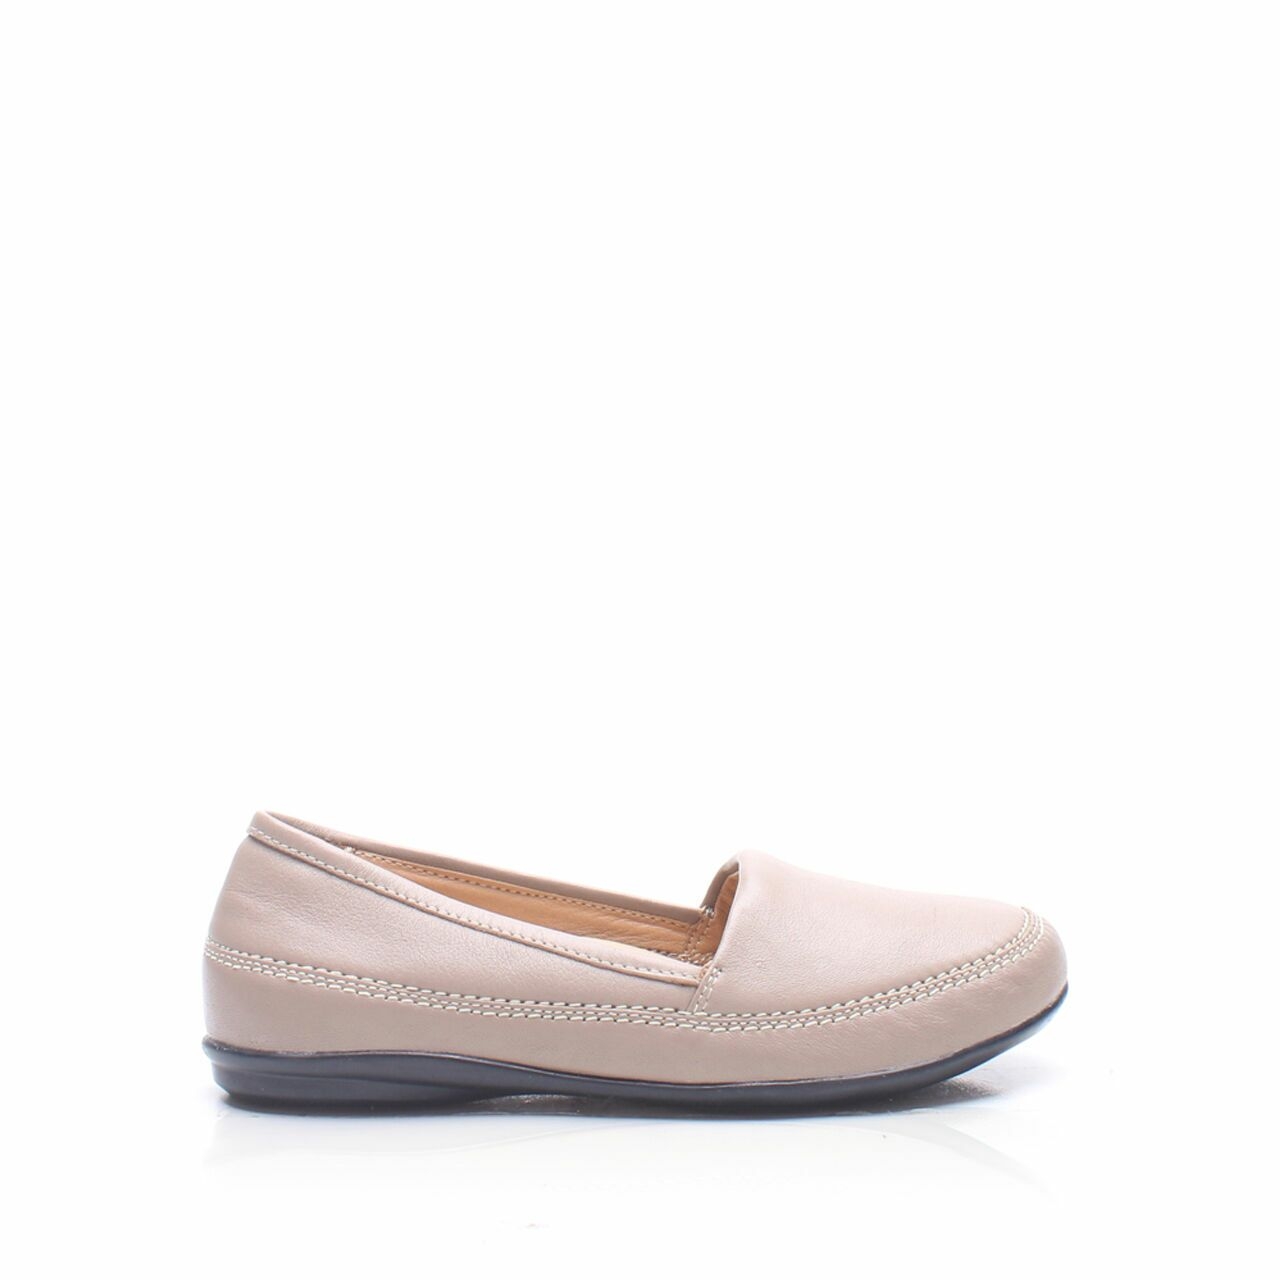 Scholl Katty Taupe Slip On Flats Shoes